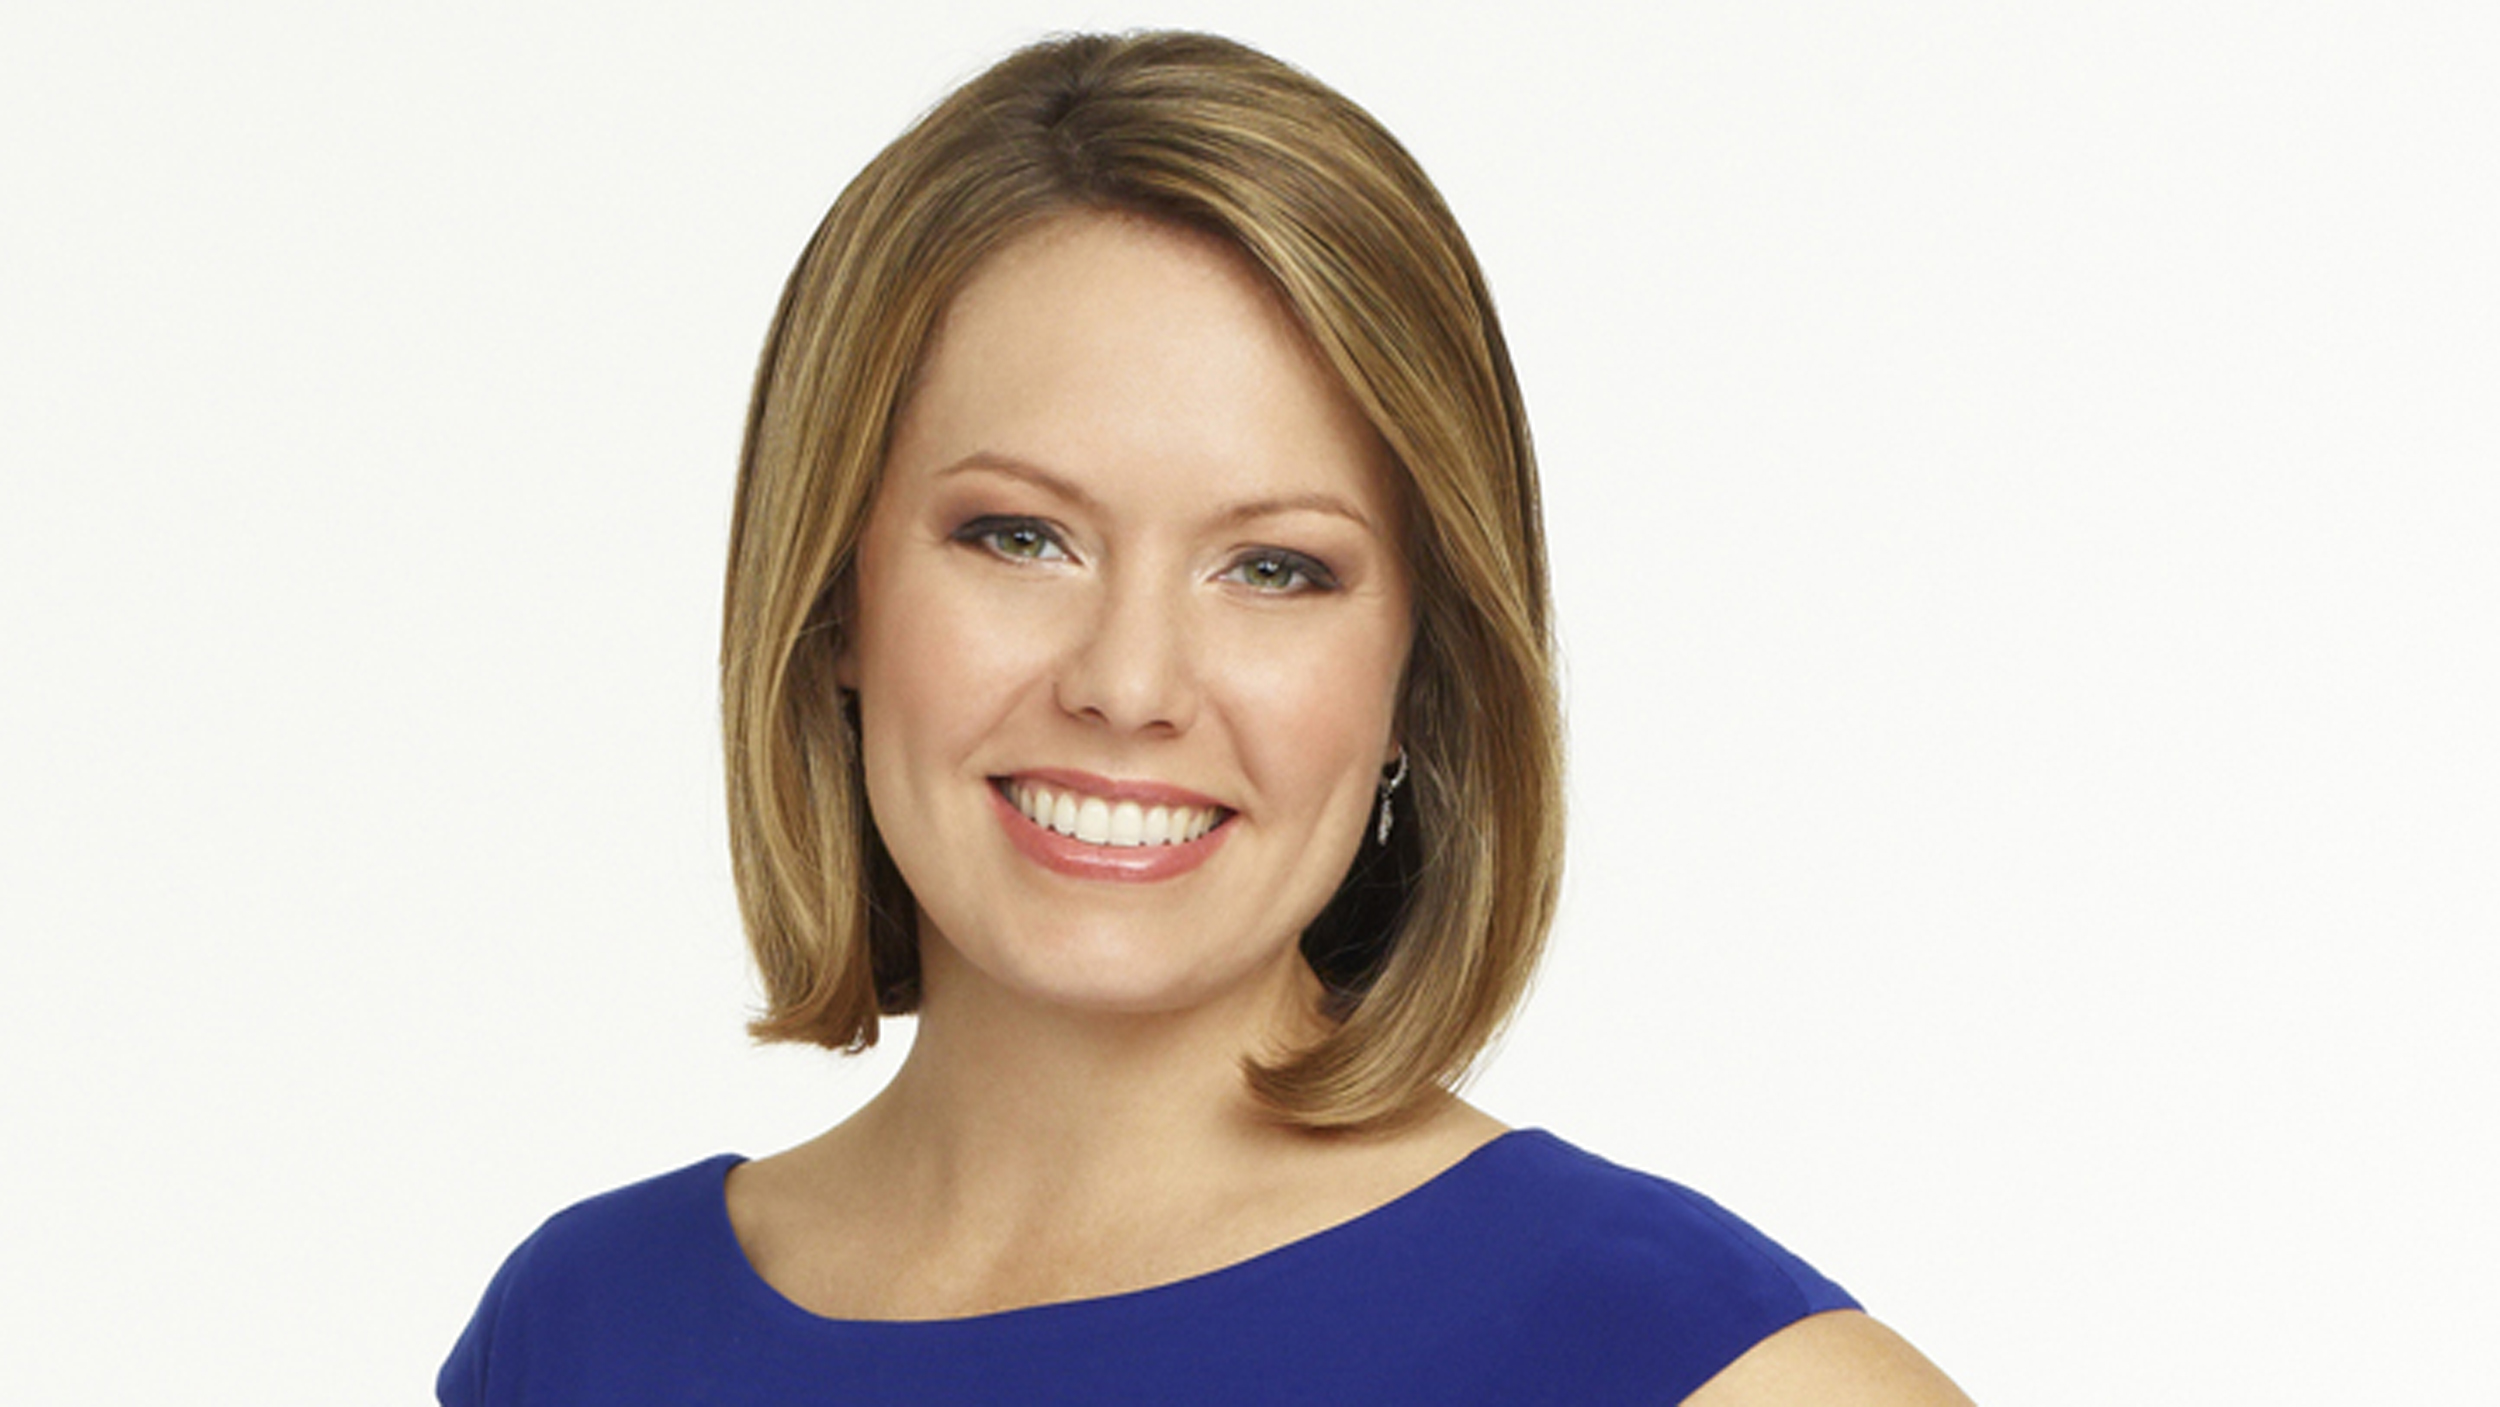 Dylan Dreyer, weather anchor for TODAY's weekend editions - TODAY.com